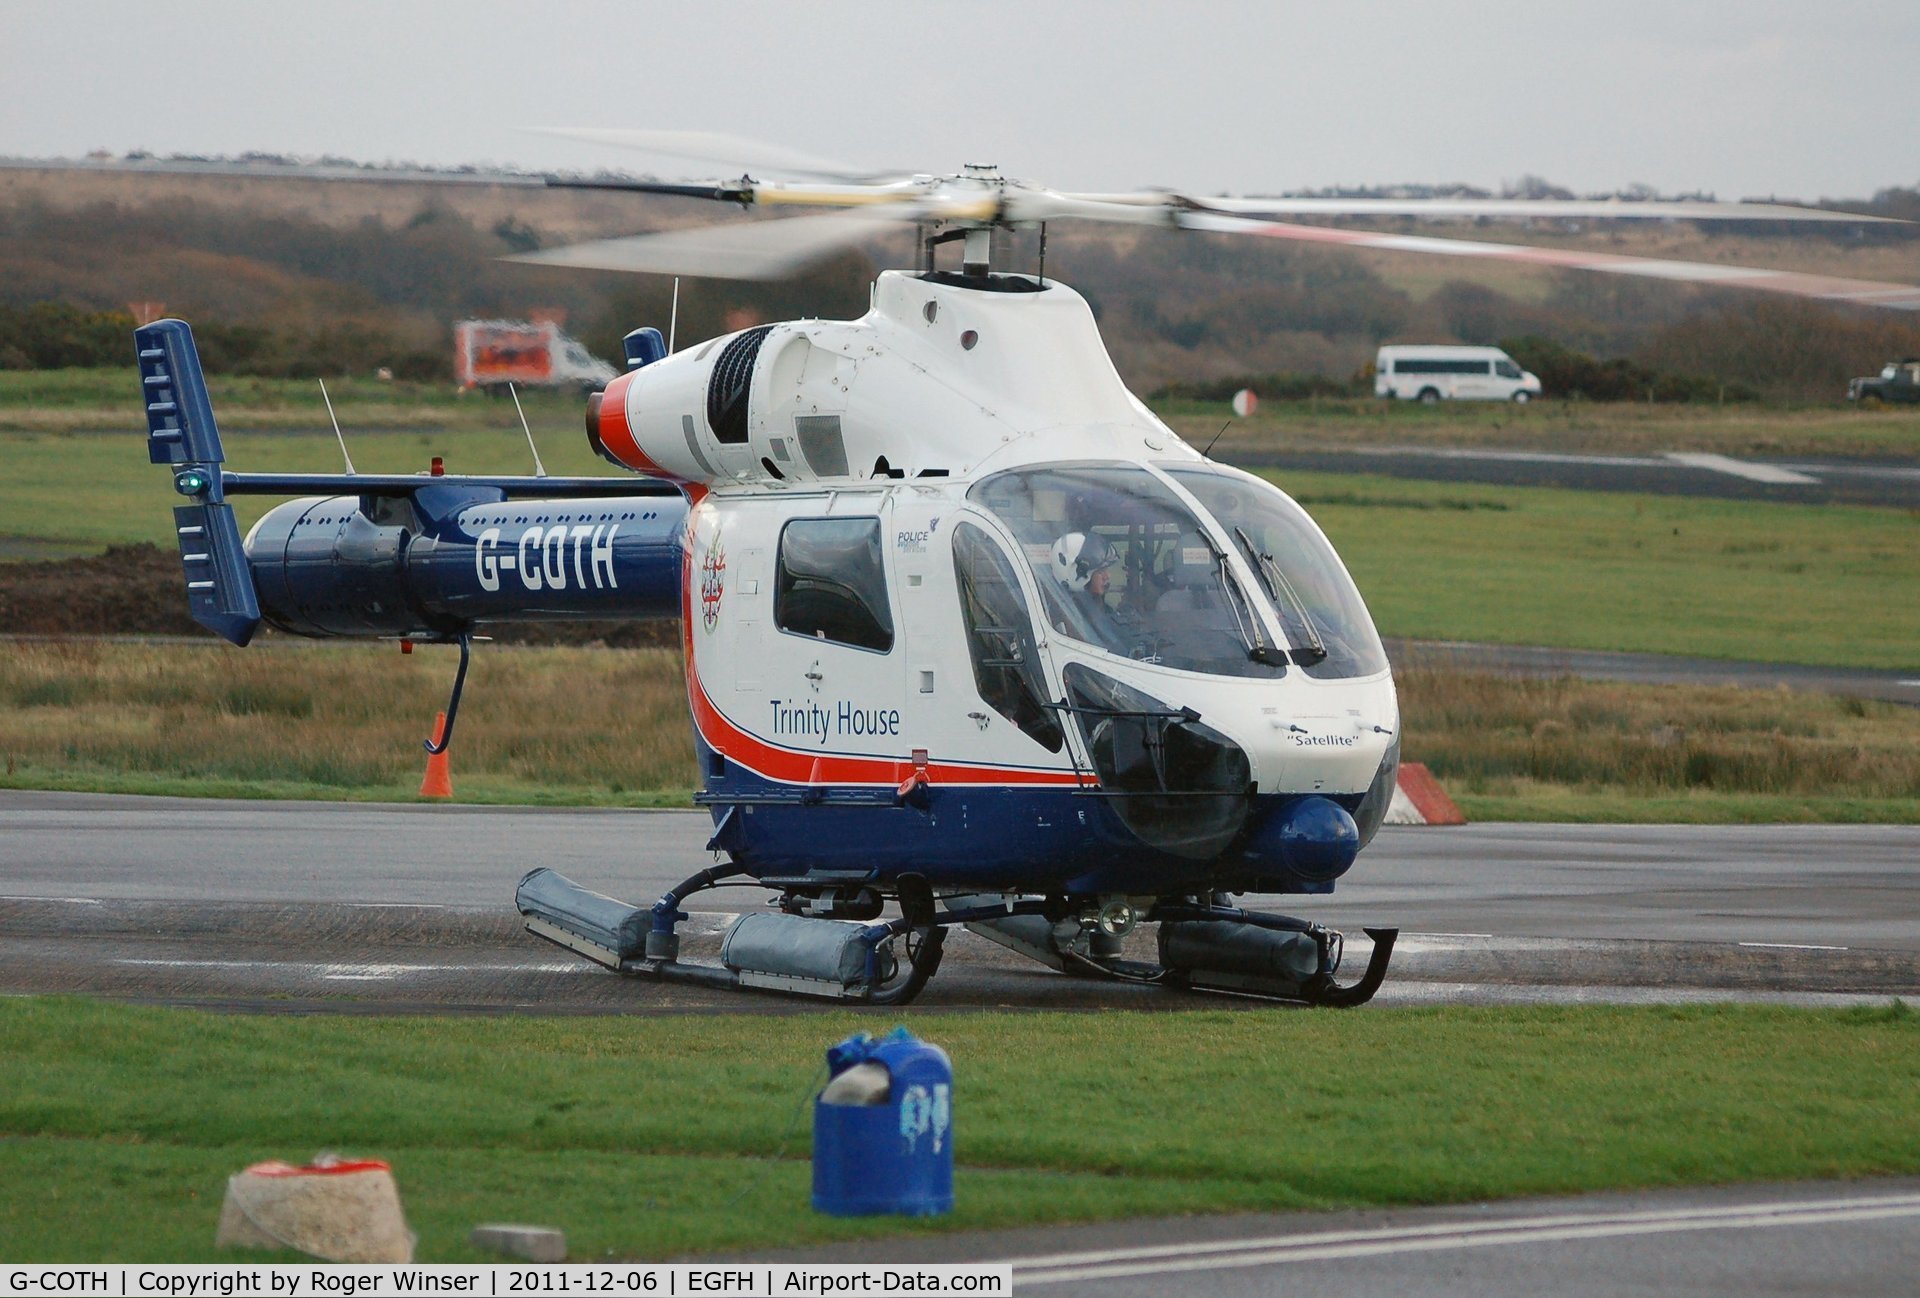 G-COTH, 2001 MD Helicopters MD-900 Explorer C/N 900-00085, Operated by Specialist Aviation Services for Trinity House. About to depart after taking on fuel.